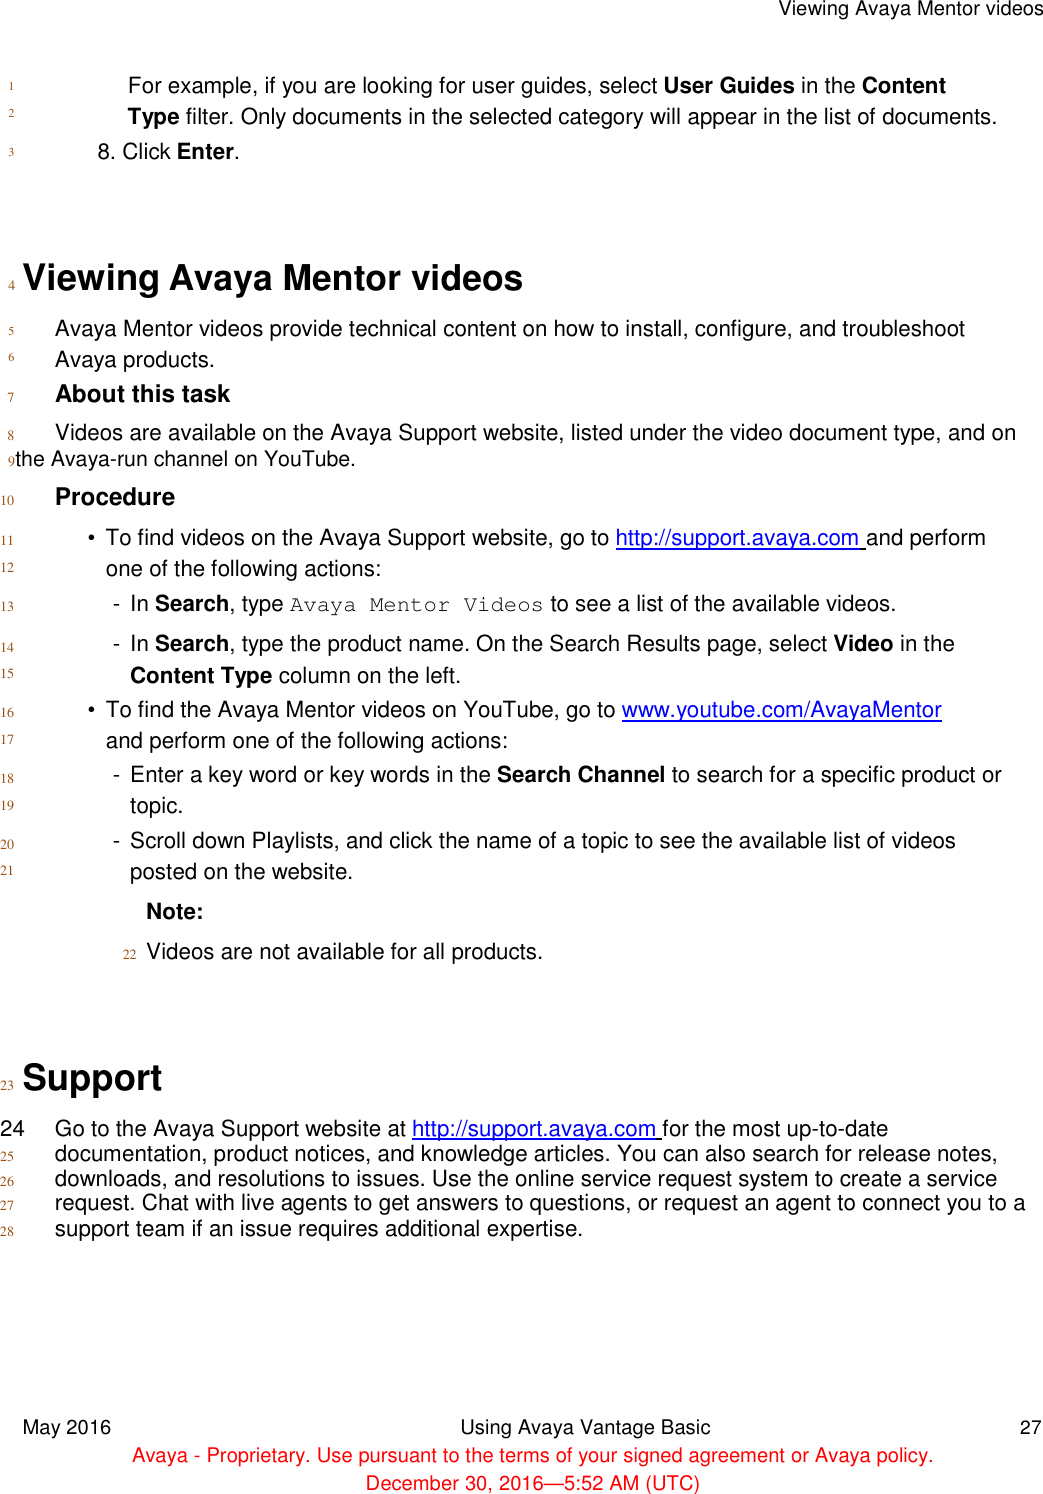      1  2  3  Viewing Avaya Mentor videos    For example, if you are looking for user guides, select User Guides in the Content Type filter. Only documents in the selected category will appear in the list of documents.  8. Click Enter.     4  Viewing Avaya Mentor videos  5  6   Avaya Mentor videos provide technical content on how to install, configure, and troubleshoot Avaya products.  7 About this task  8 Videos are available on the Avaya Support website, listed under the video document type, and on  9the Avaya-run channel on YouTube.  10 Procedure  11  12  13  14  15  16  17  18  19  20  21   •  To find videos on the Avaya Support website, go to http://support.avaya.com and perform one of the following actions:  -  In Search, type Avaya Mentor Videos to see a list of the available videos.  -  In Search, type the product name. On the Search Results page, select Video in the Content Type column on the left.  •  To find the Avaya Mentor videos on YouTube, go to www.youtube.com/AvayaMentor and perform one of the following actions:  -  Enter a key word or key words in the Search Channel to search for a specific product or topic.  -  Scroll down Playlists, and click the name of a topic to see the available list of videos posted on the website.  Note:  22 Videos are not available for all products.     23 Support  24  Go to the Avaya Support website at http://support.avaya.com for the most up-to-date  25 documentation, product notices, and knowledge articles. You can also search for release notes, 26 downloads, and resolutions to issues. Use the online service request system to create a service 27 request. Chat with live agents to get answers to questions, or request an agent to connect you to a 28 support team if an issue requires additional expertise.         May 2016 Using Avaya Vantage Basic 27  Avaya - Proprietary. Use pursuant to the terms of your signed agreement or Avaya policy.  December 30, 2016—5:52 AM (UTC) 